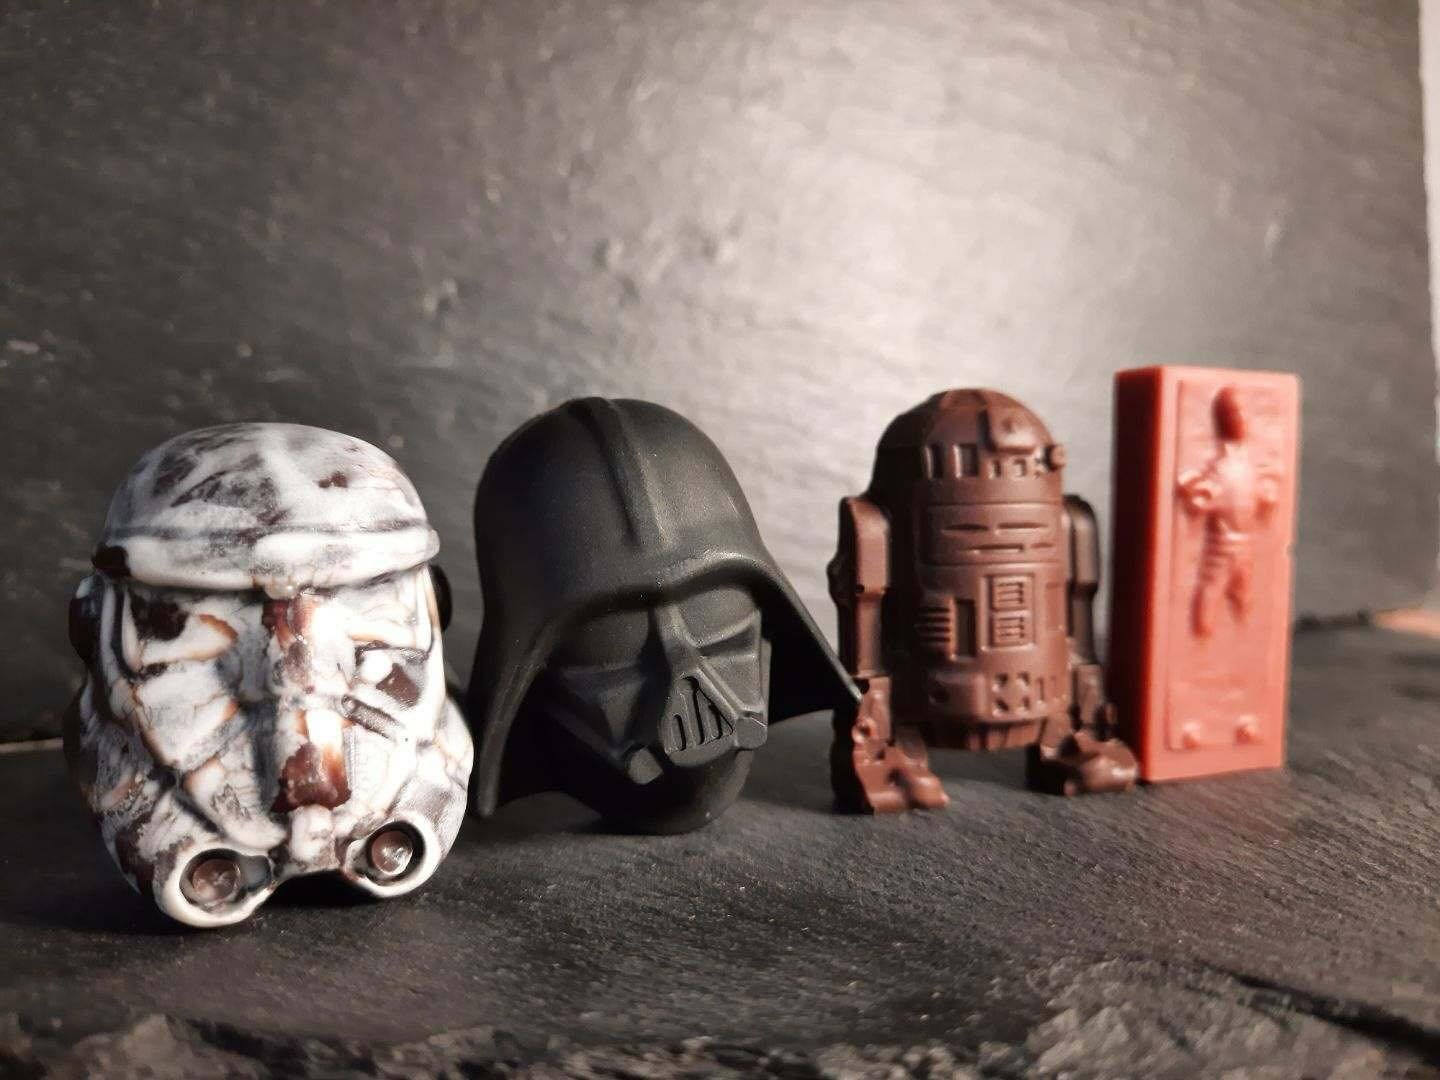 SPECIAL VERY LIMITED EDITION STAR WARS CHOCOLATES!
MADE BY THE TALENTED @drjeff4000 THESE CHOCS ARE RIDICULOUS. 
FLAVORS ARE:
STORM TROOPER - SEA SALT DULCE DE LECHE
DARTH VADER - BLOOD ORANGE CARAMEL
R2D2 - DARK MILK CHOCOLATE 
CARBONITE HAN SOLO - 